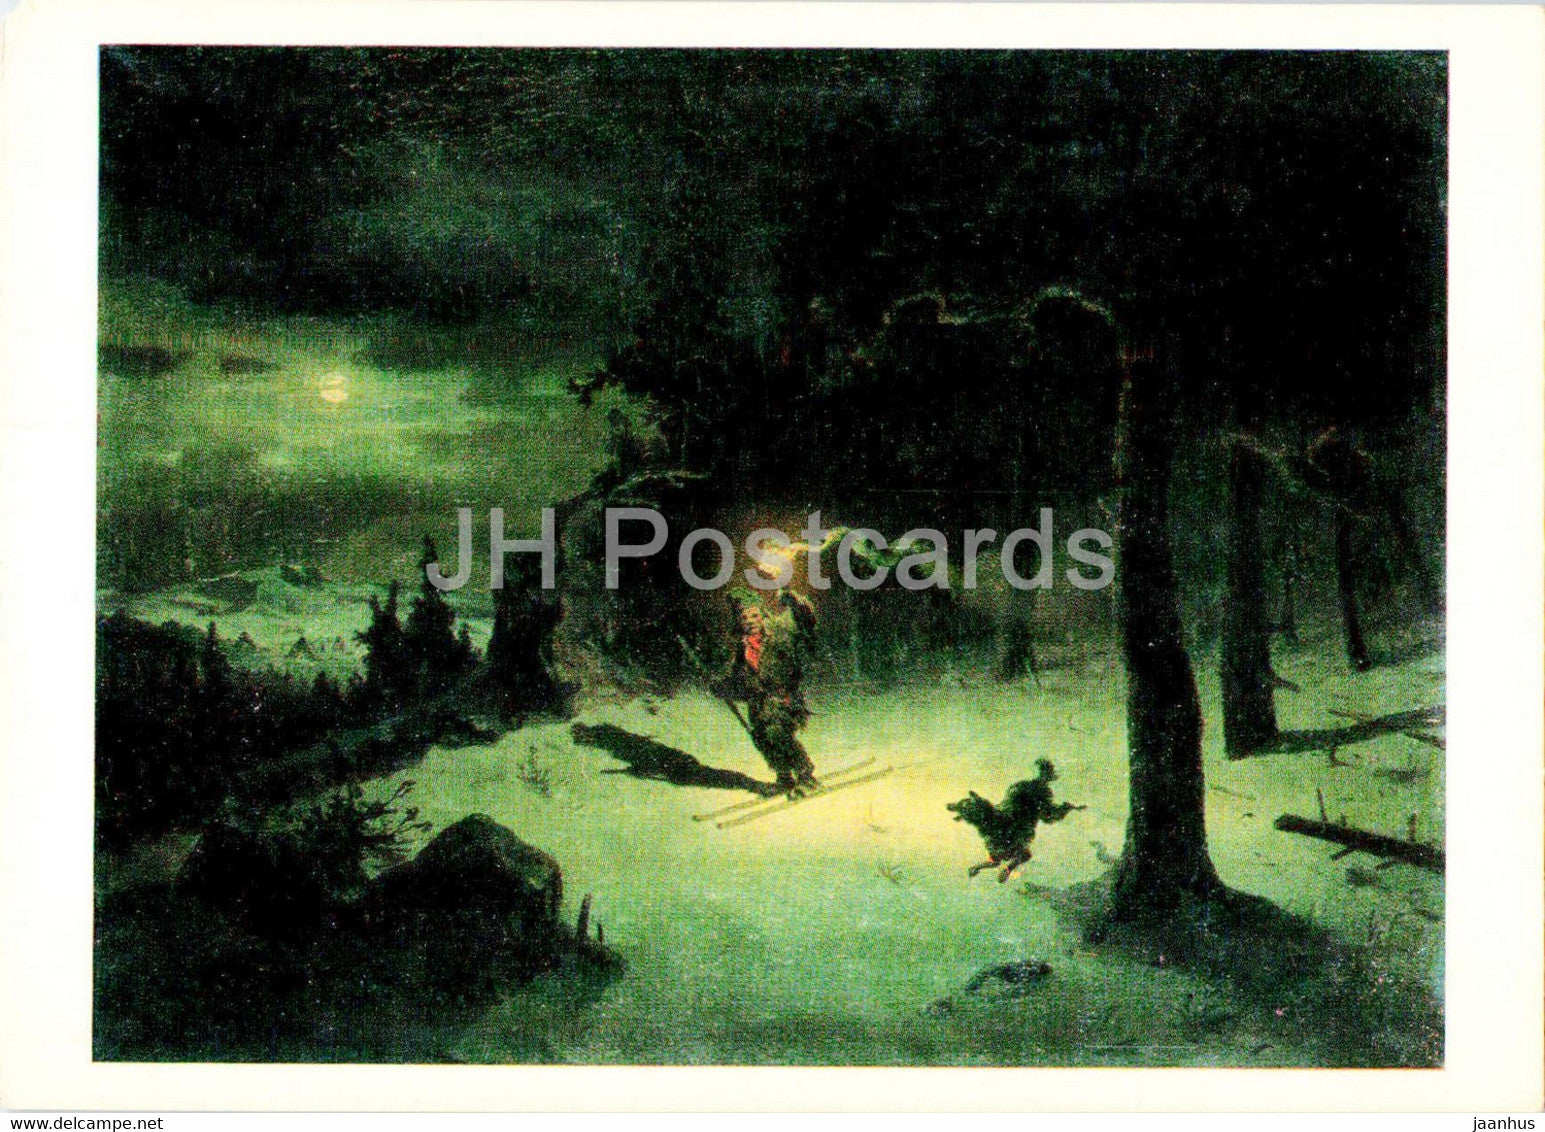 painting by Axel Nordgren - Laplander with a torch - Swedish Art - 1989 - Russia USSR - unused - JH Postcards